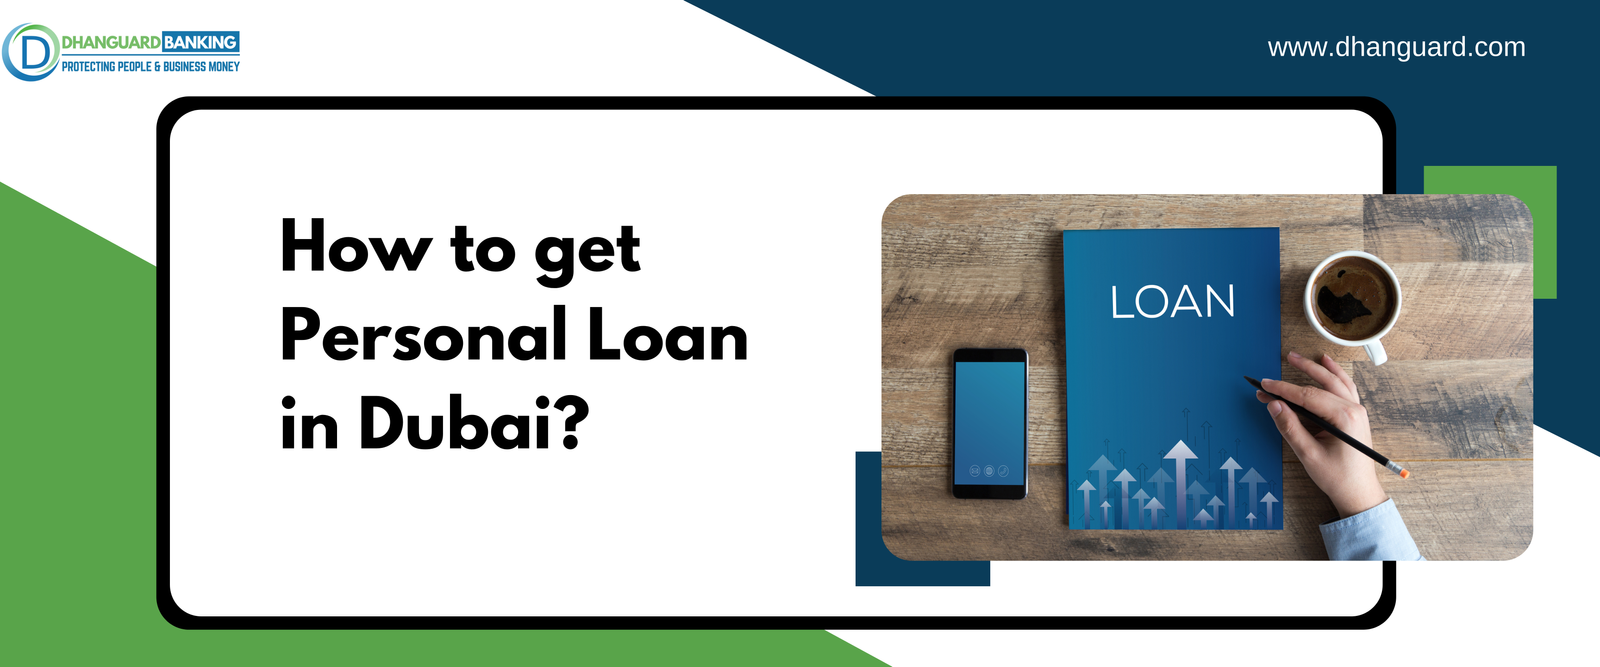 How to get Personal Loan in Dubai | Dhanguard